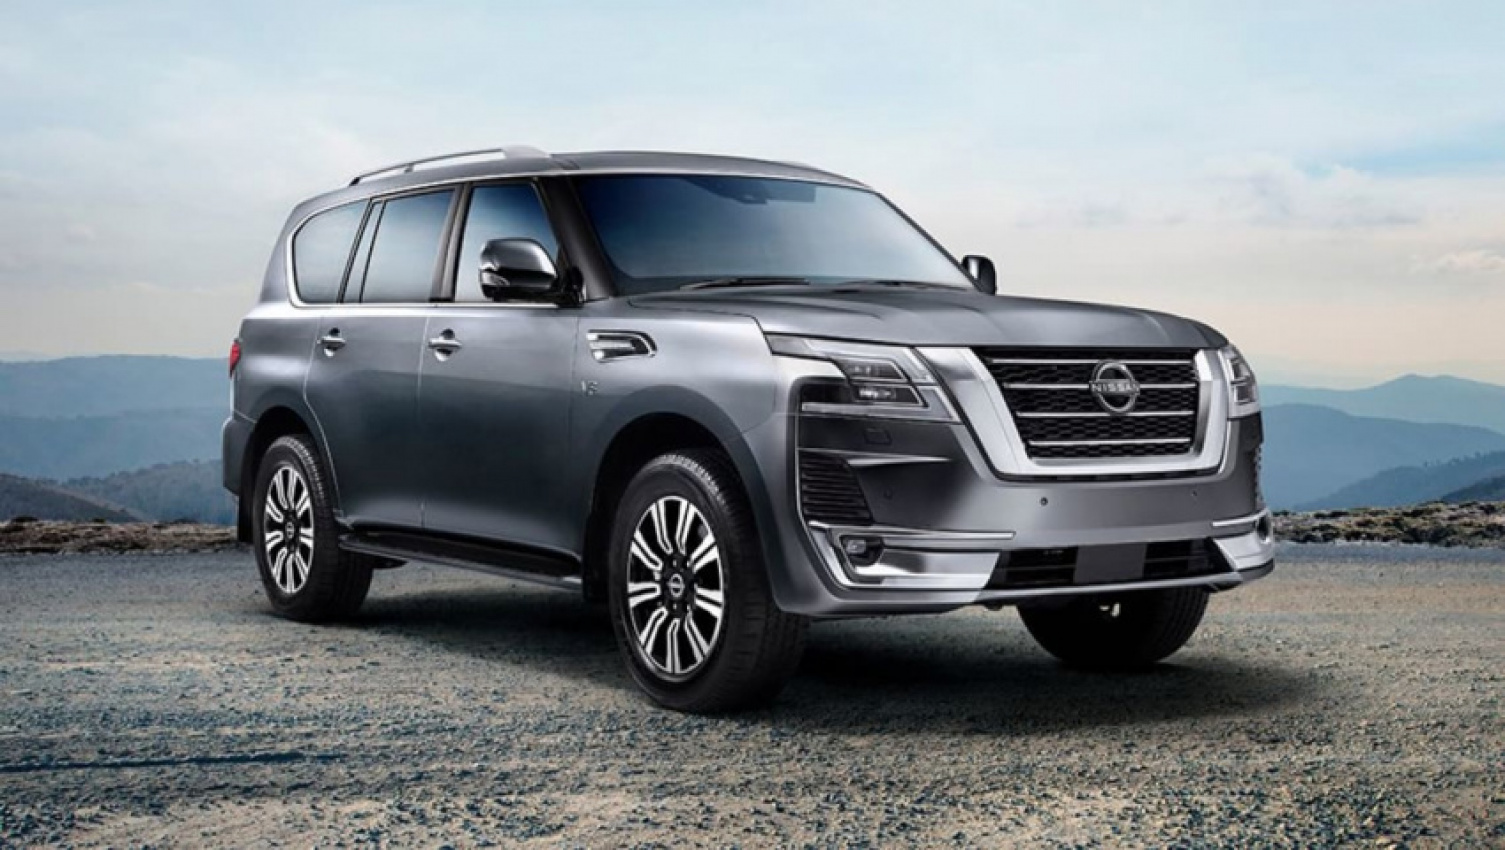 autos, cars, nissan, toyota, industry news, nissan news, nissan patrol, nissan patrol 2022, nissan suv range, showroom news, how long is the wait time for a 2022 nissan patrol? buyers of recently updated toyota landcruiser 300 series rival facing relatively short delivery process